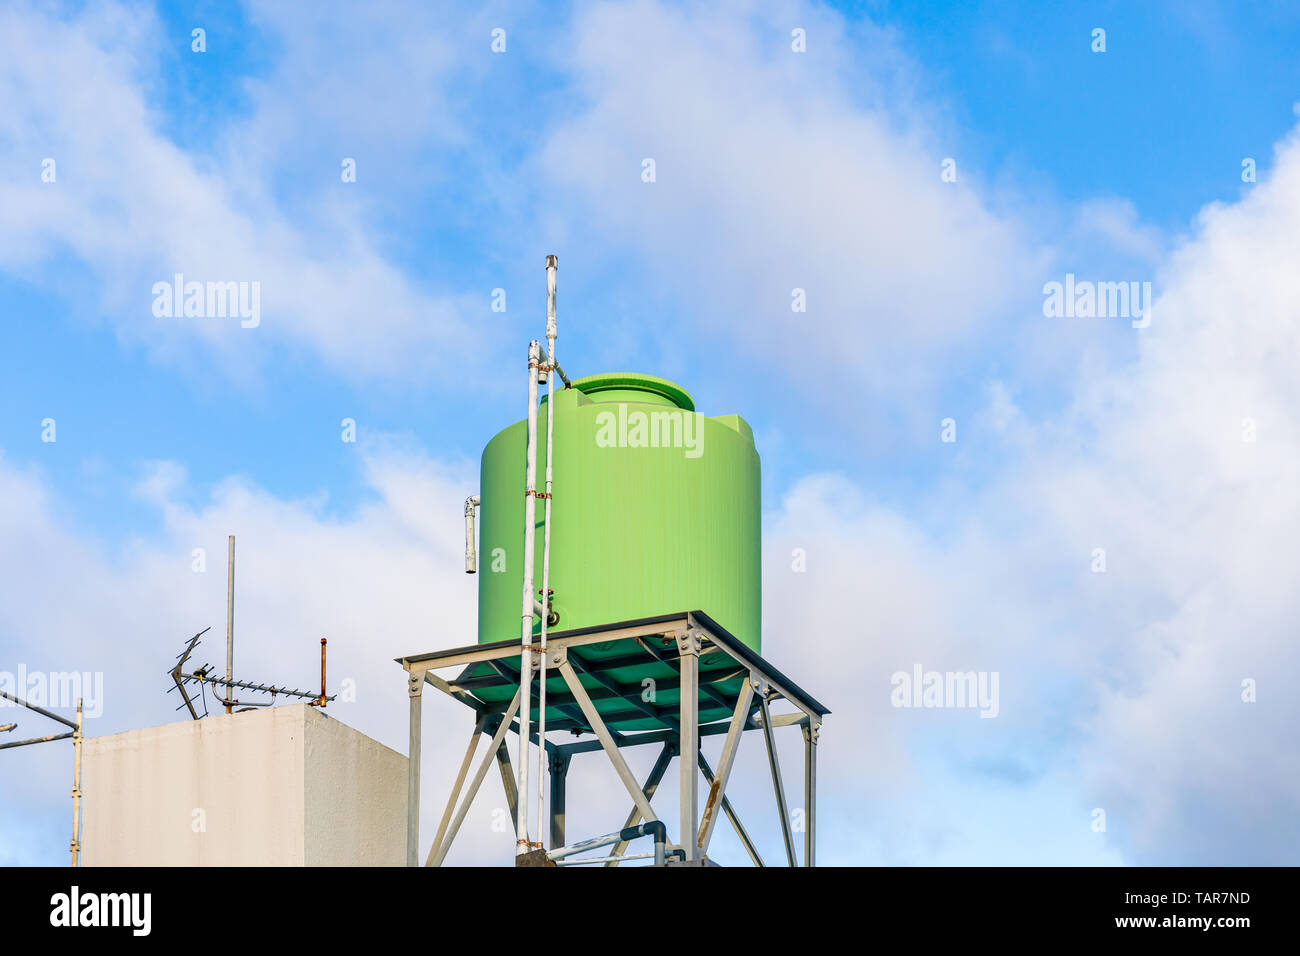 Green rooftop water tank against a blue sky with clouds; Naha, Okinawa, Japan Stock Photo